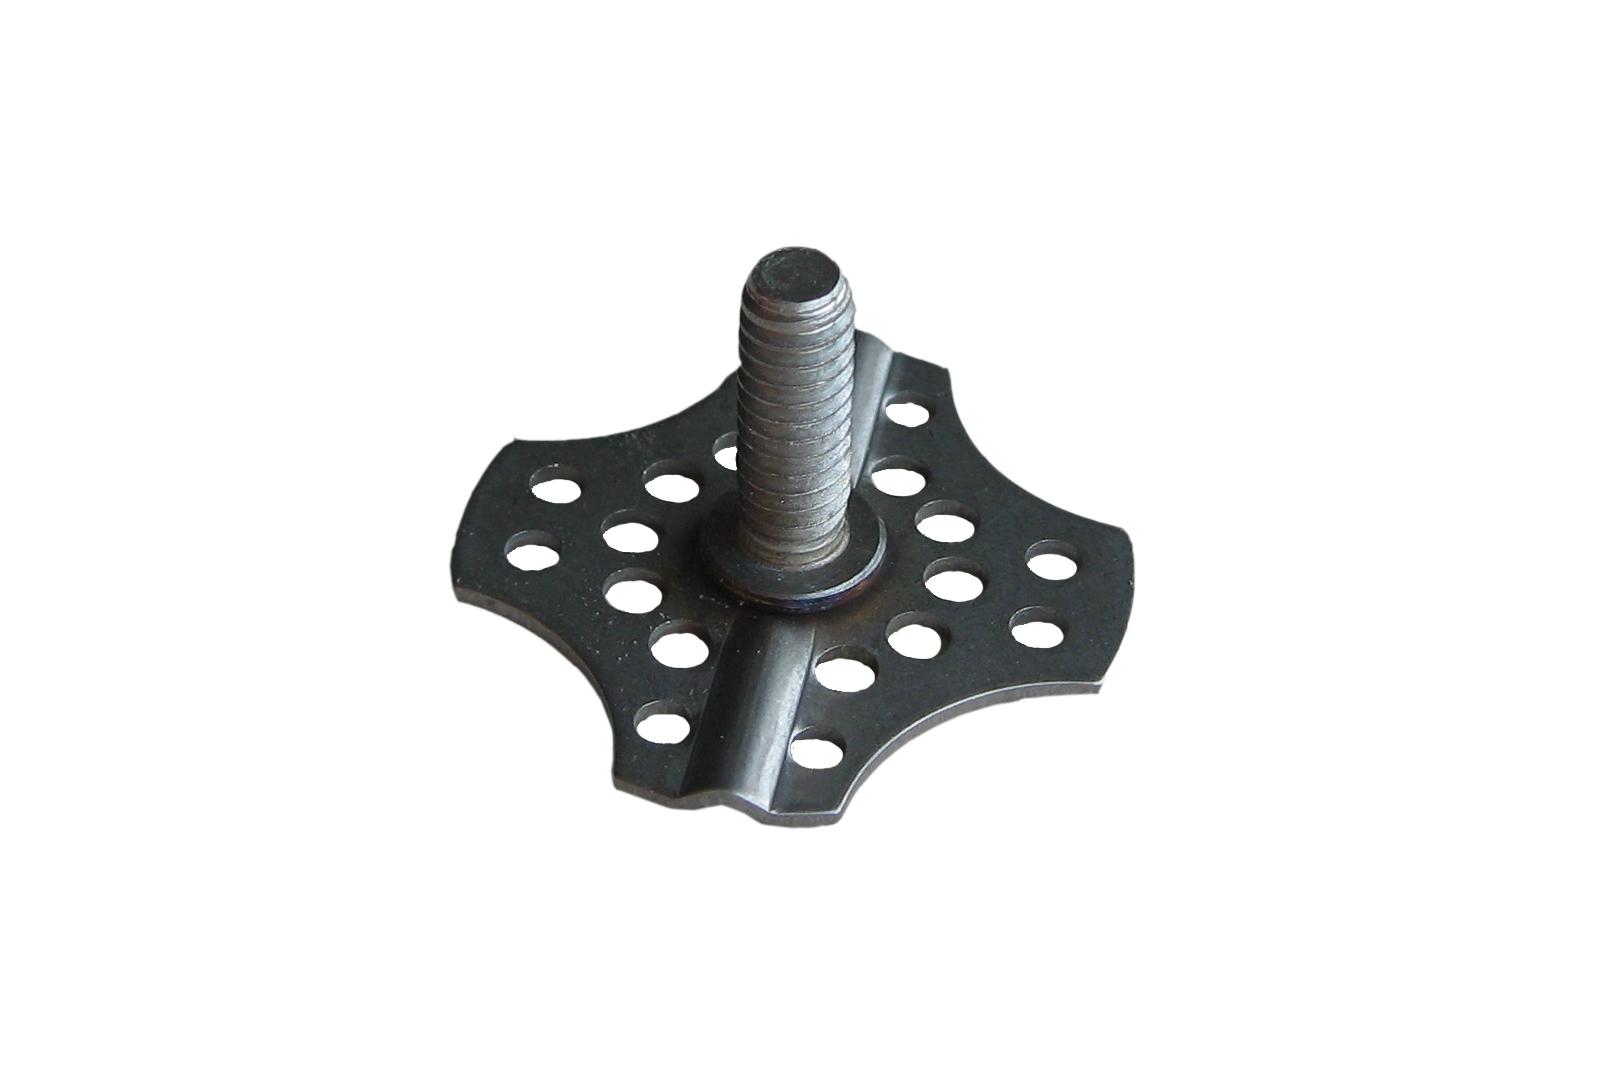 Mounting Stud for Foot Brace